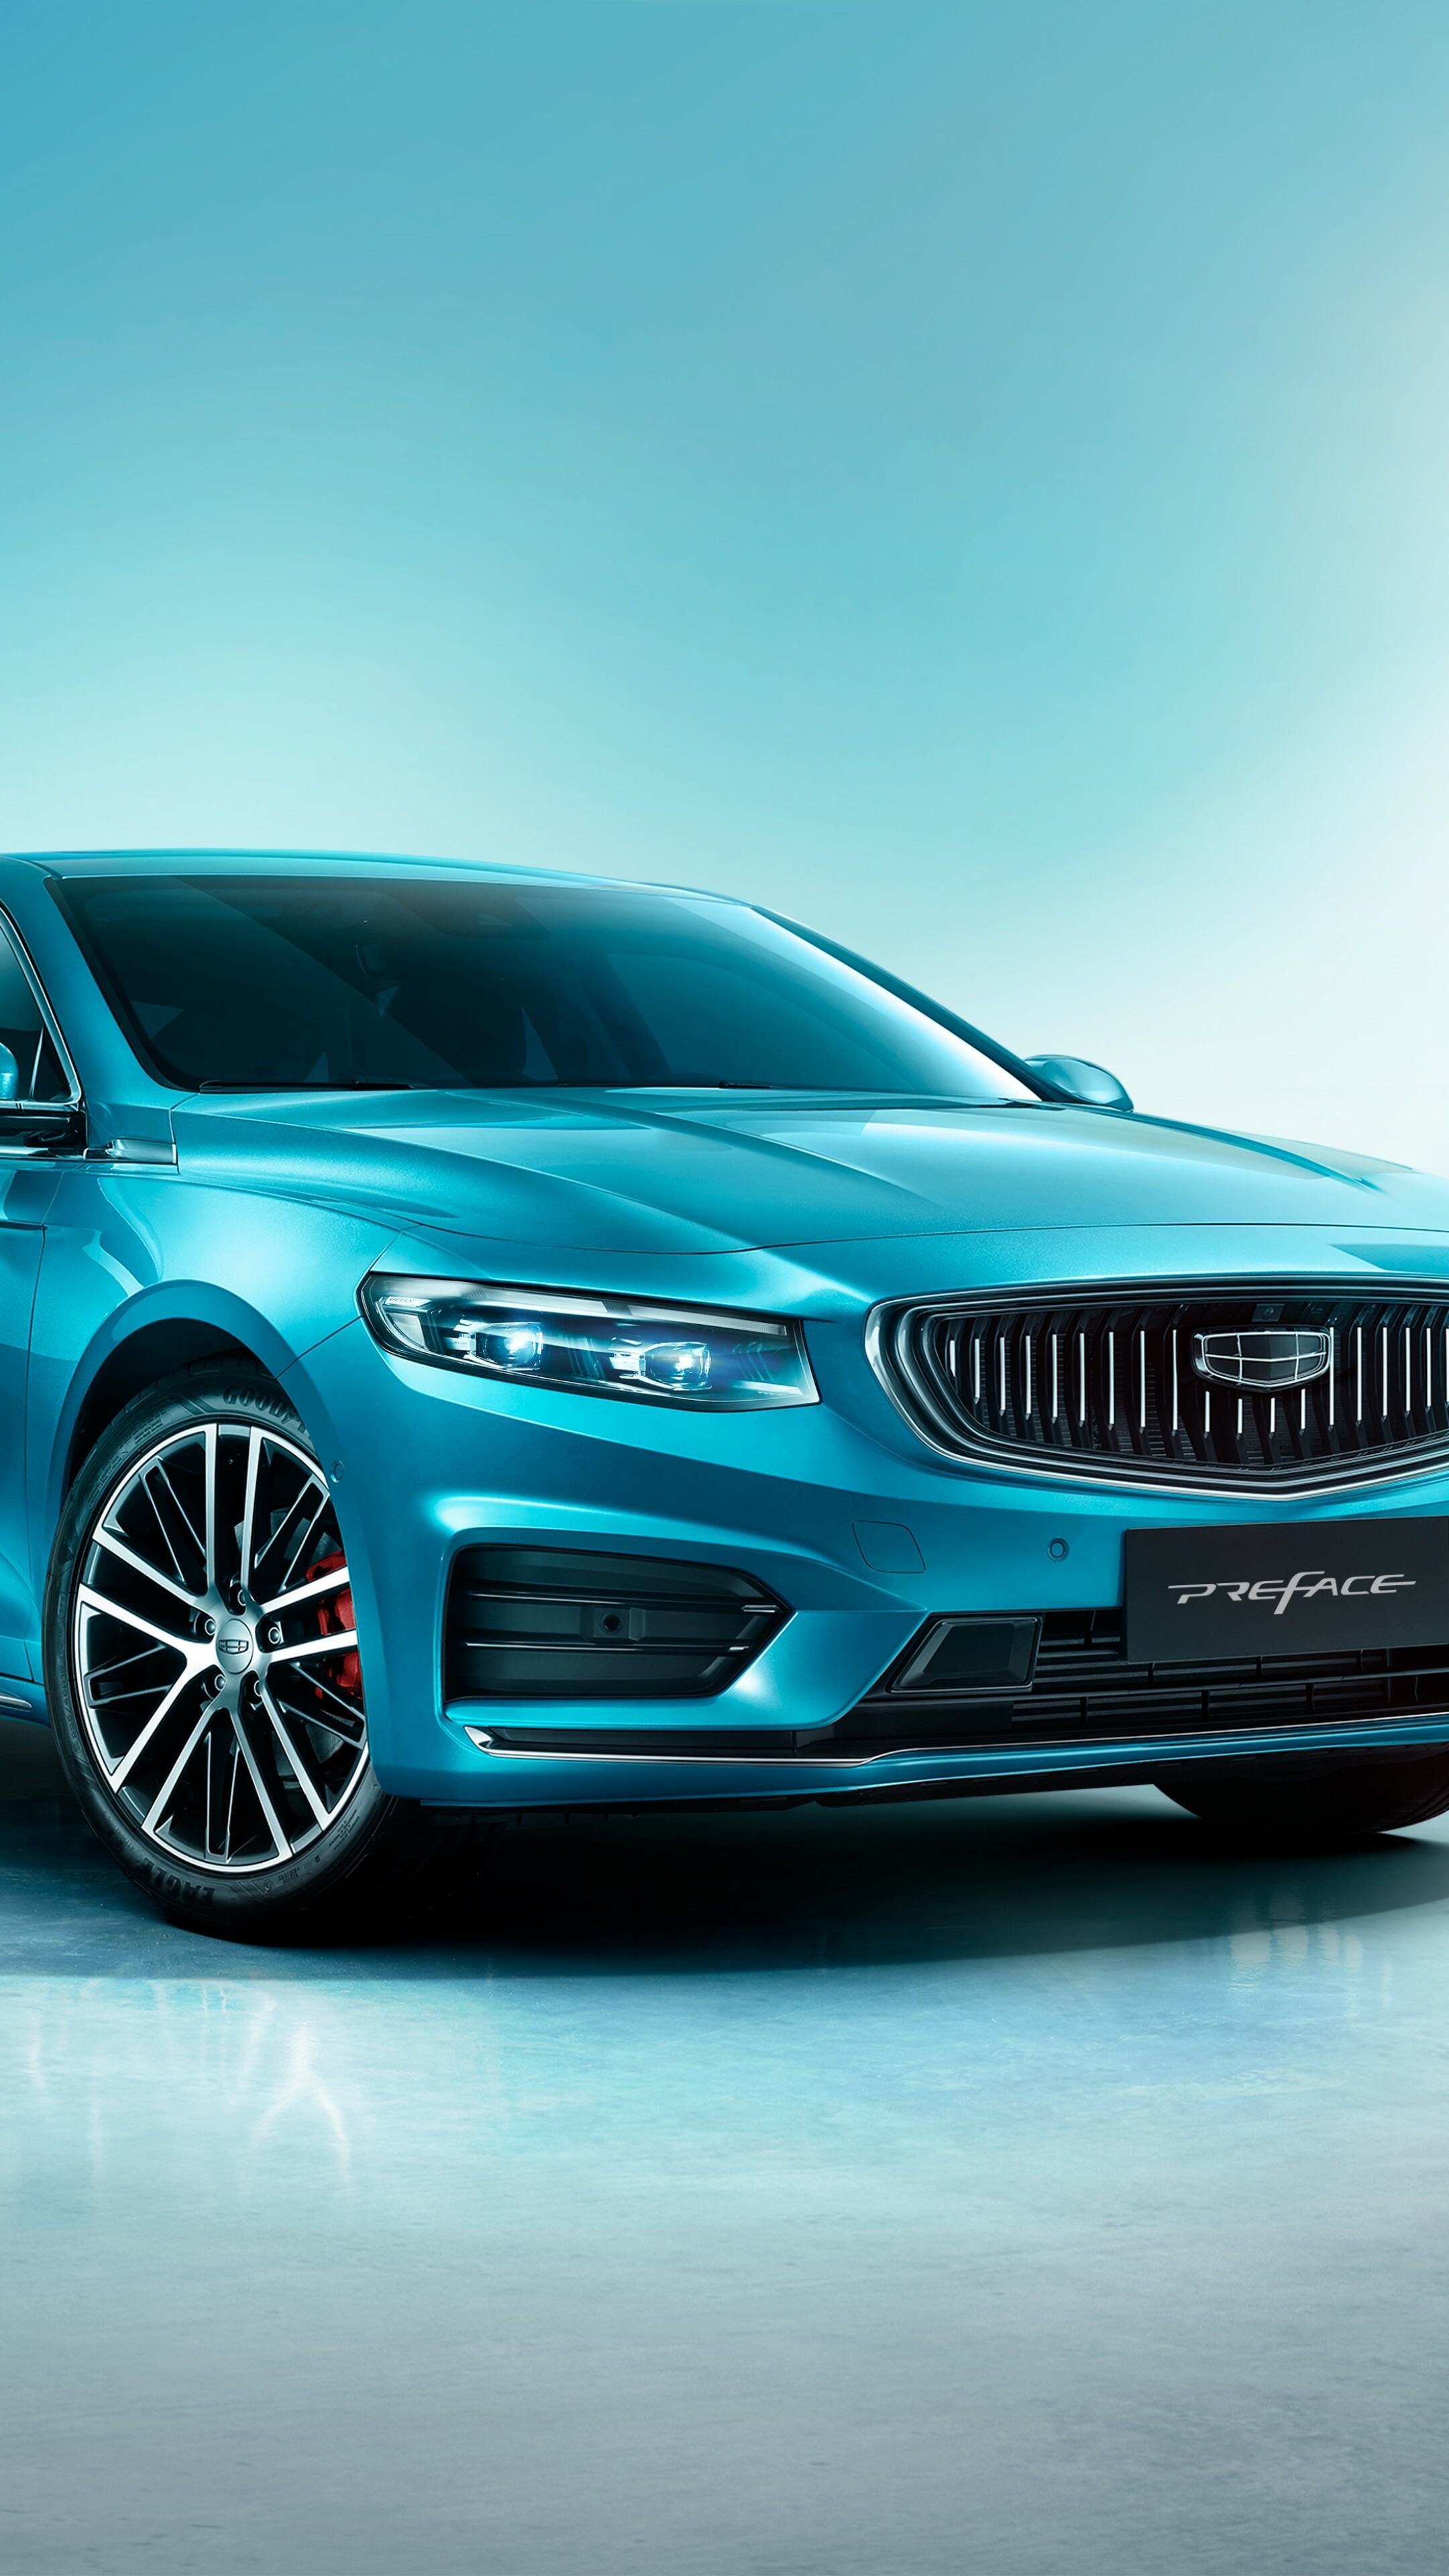 Geely: Model Preface, Guangzhou Motor Show, 2020 cars. 2160x3840 4K Background.